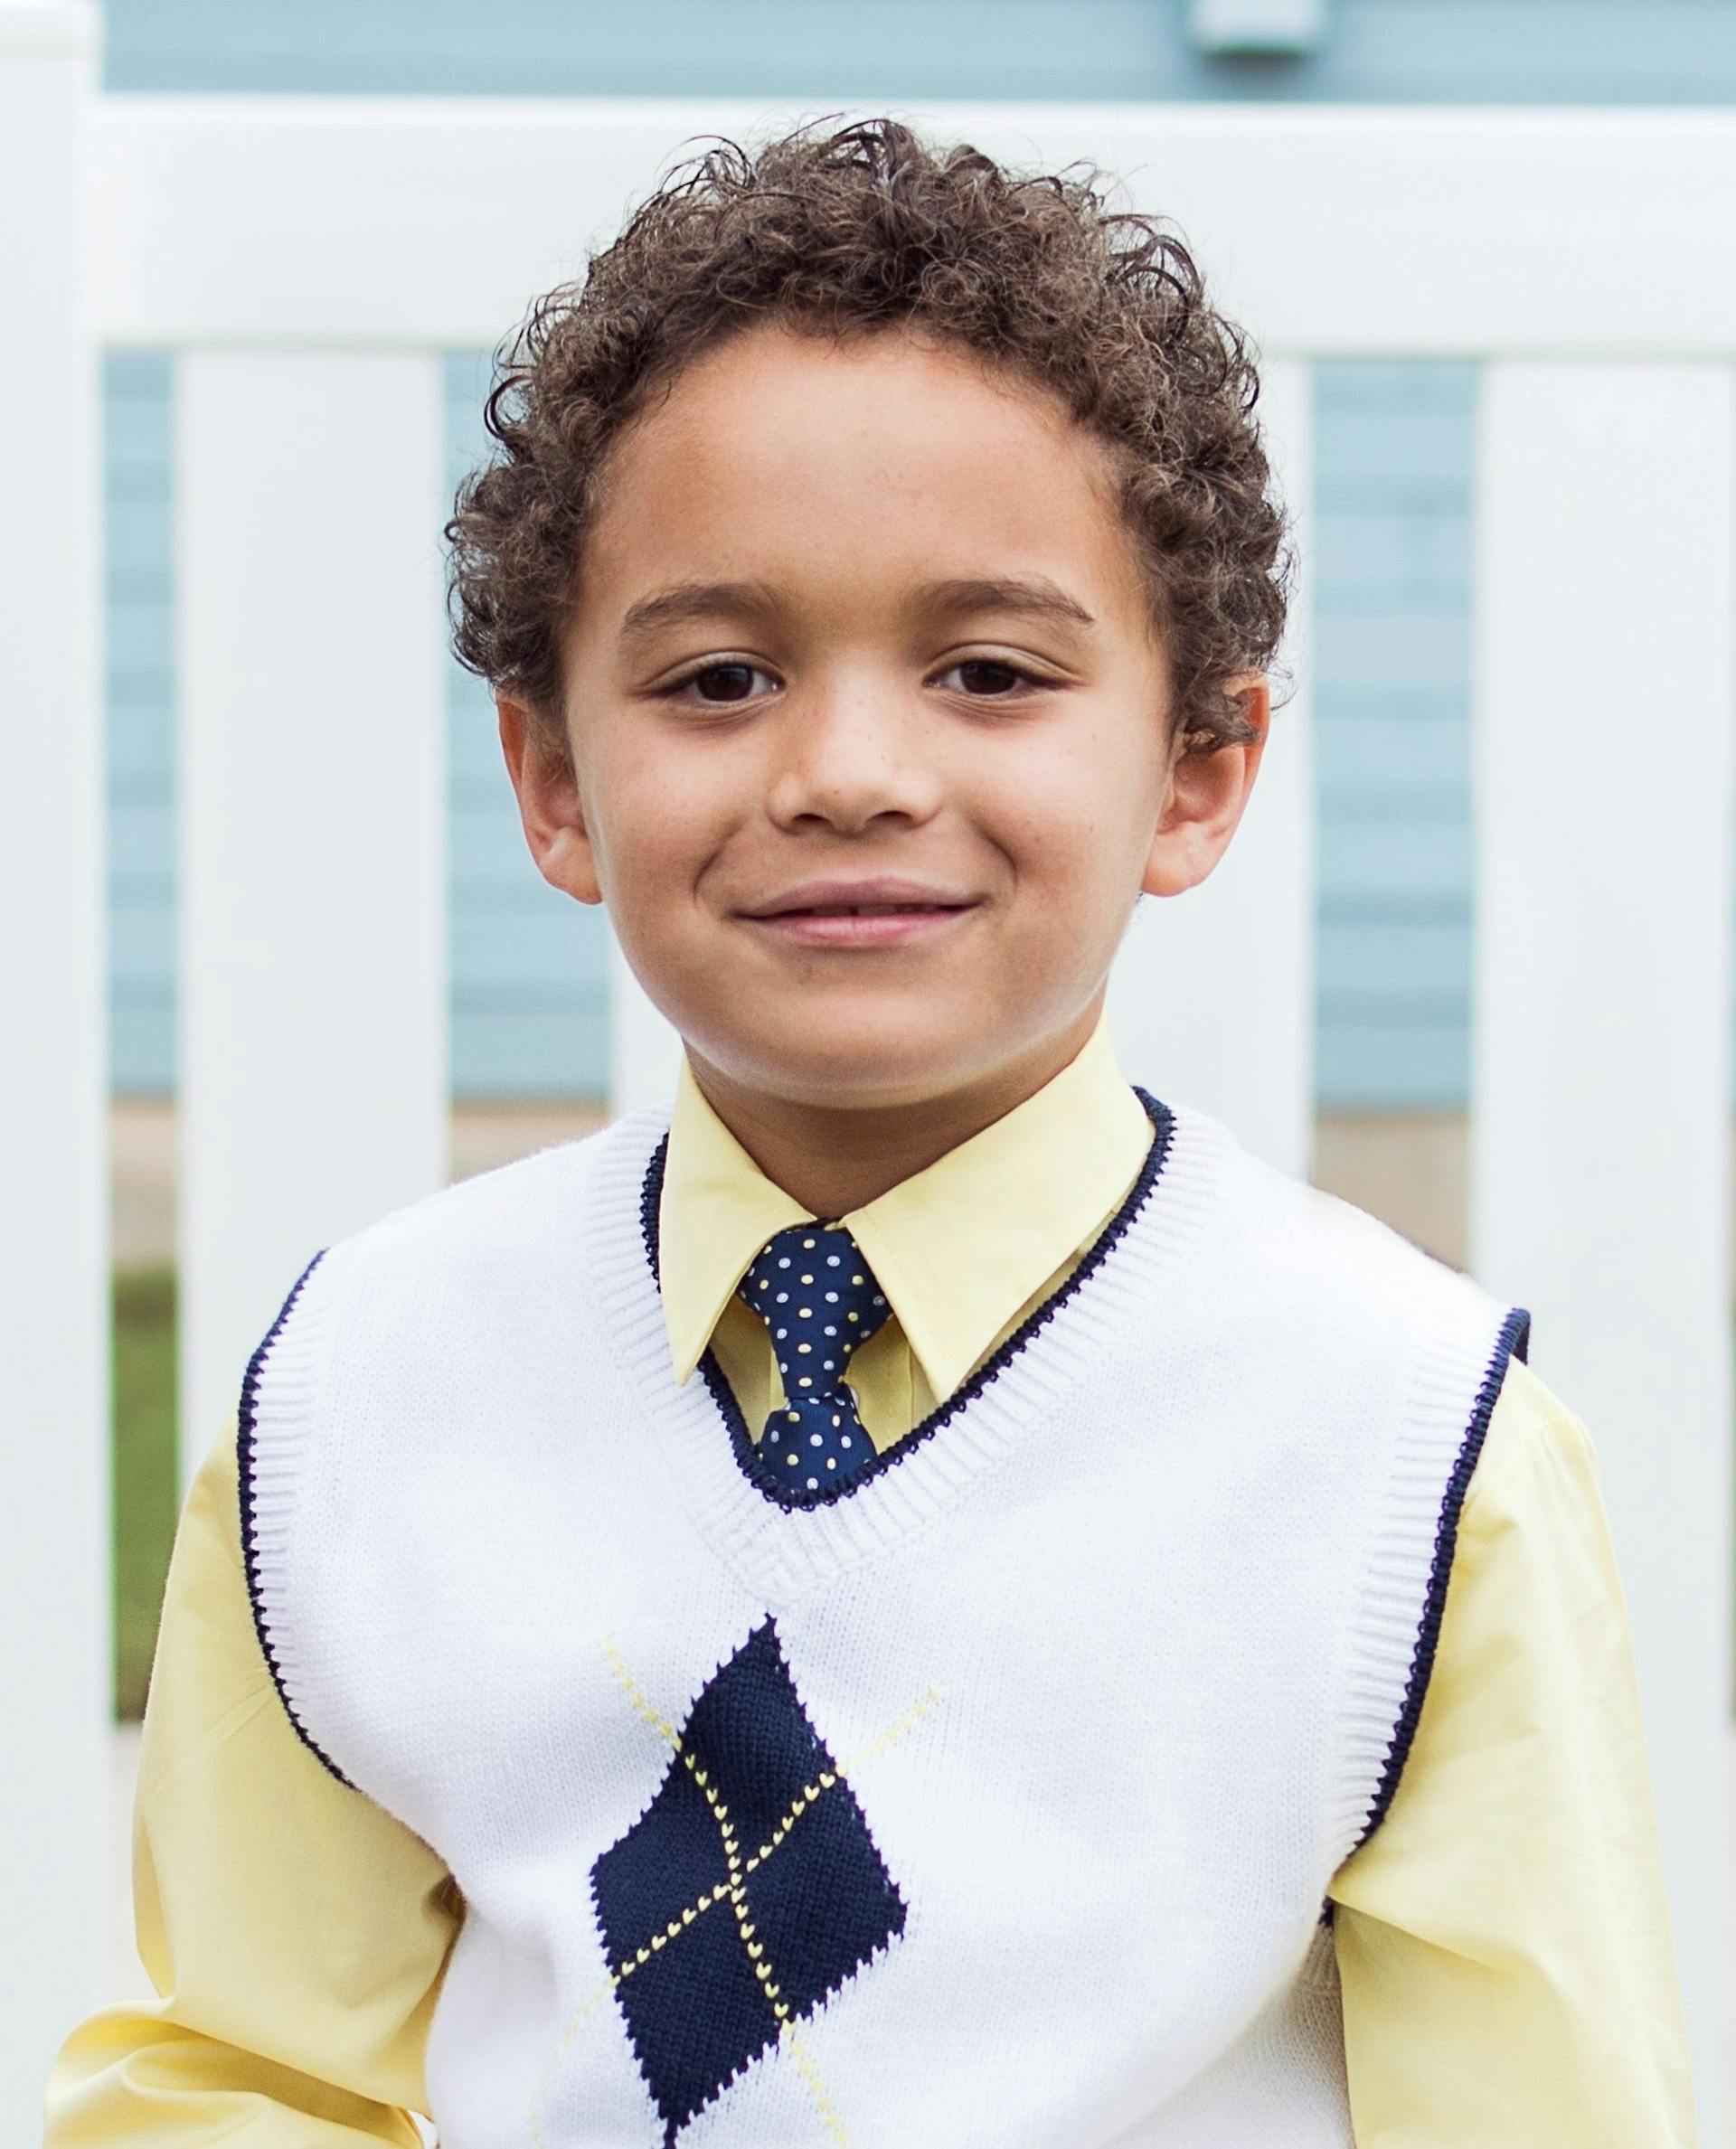 Young boy smiling at the camera | Source: Pexels